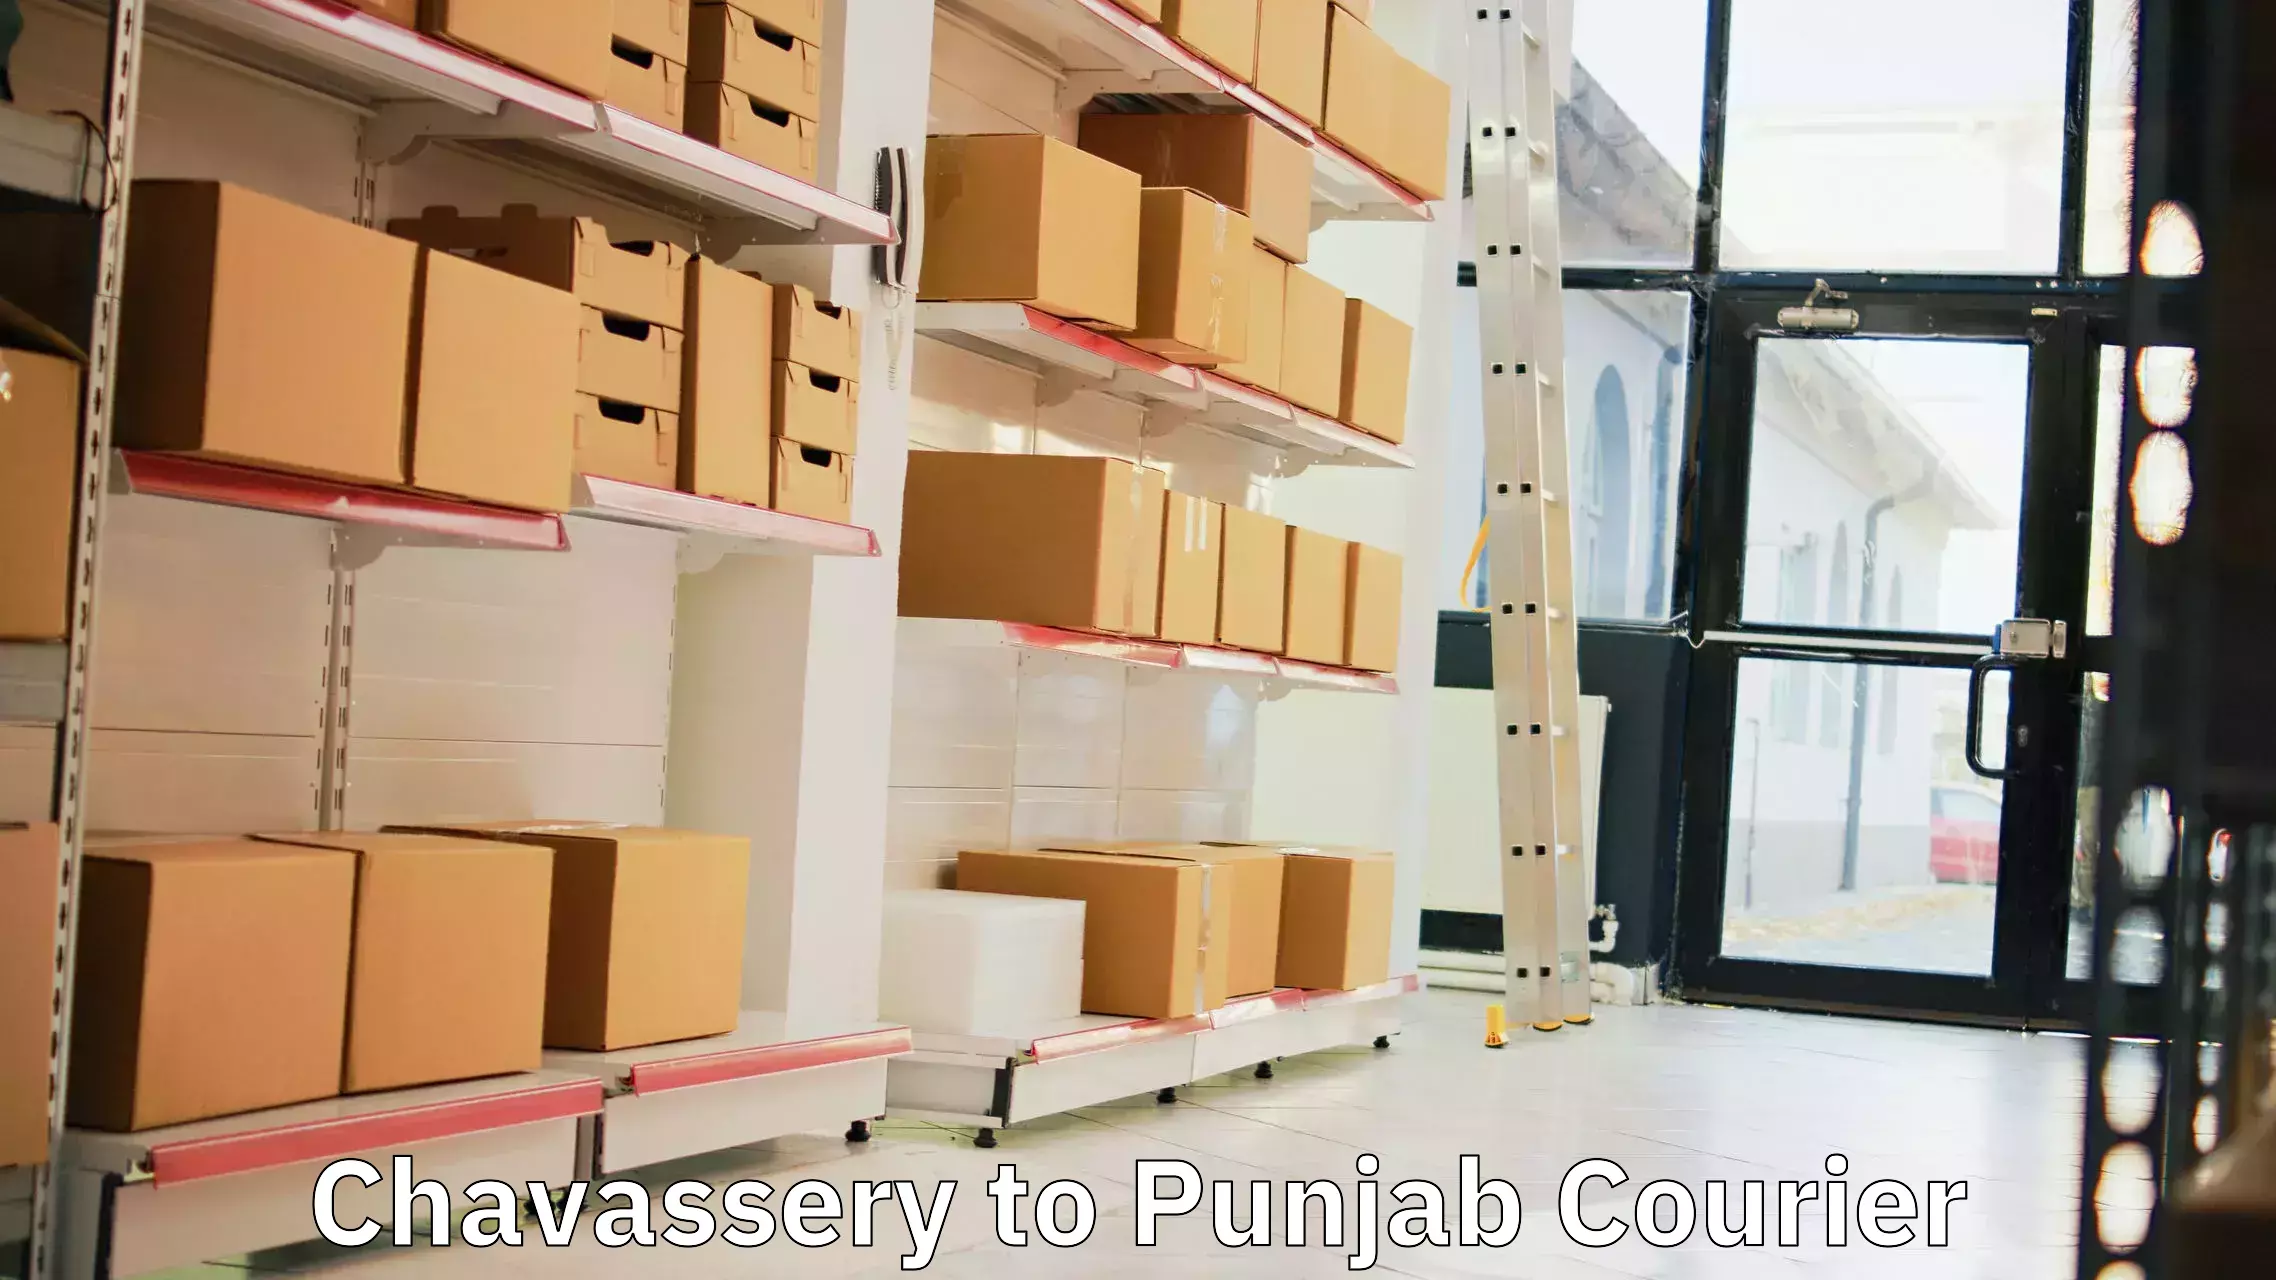 Customer-oriented courier services Chavassery to Central University of Punjab Bathinda